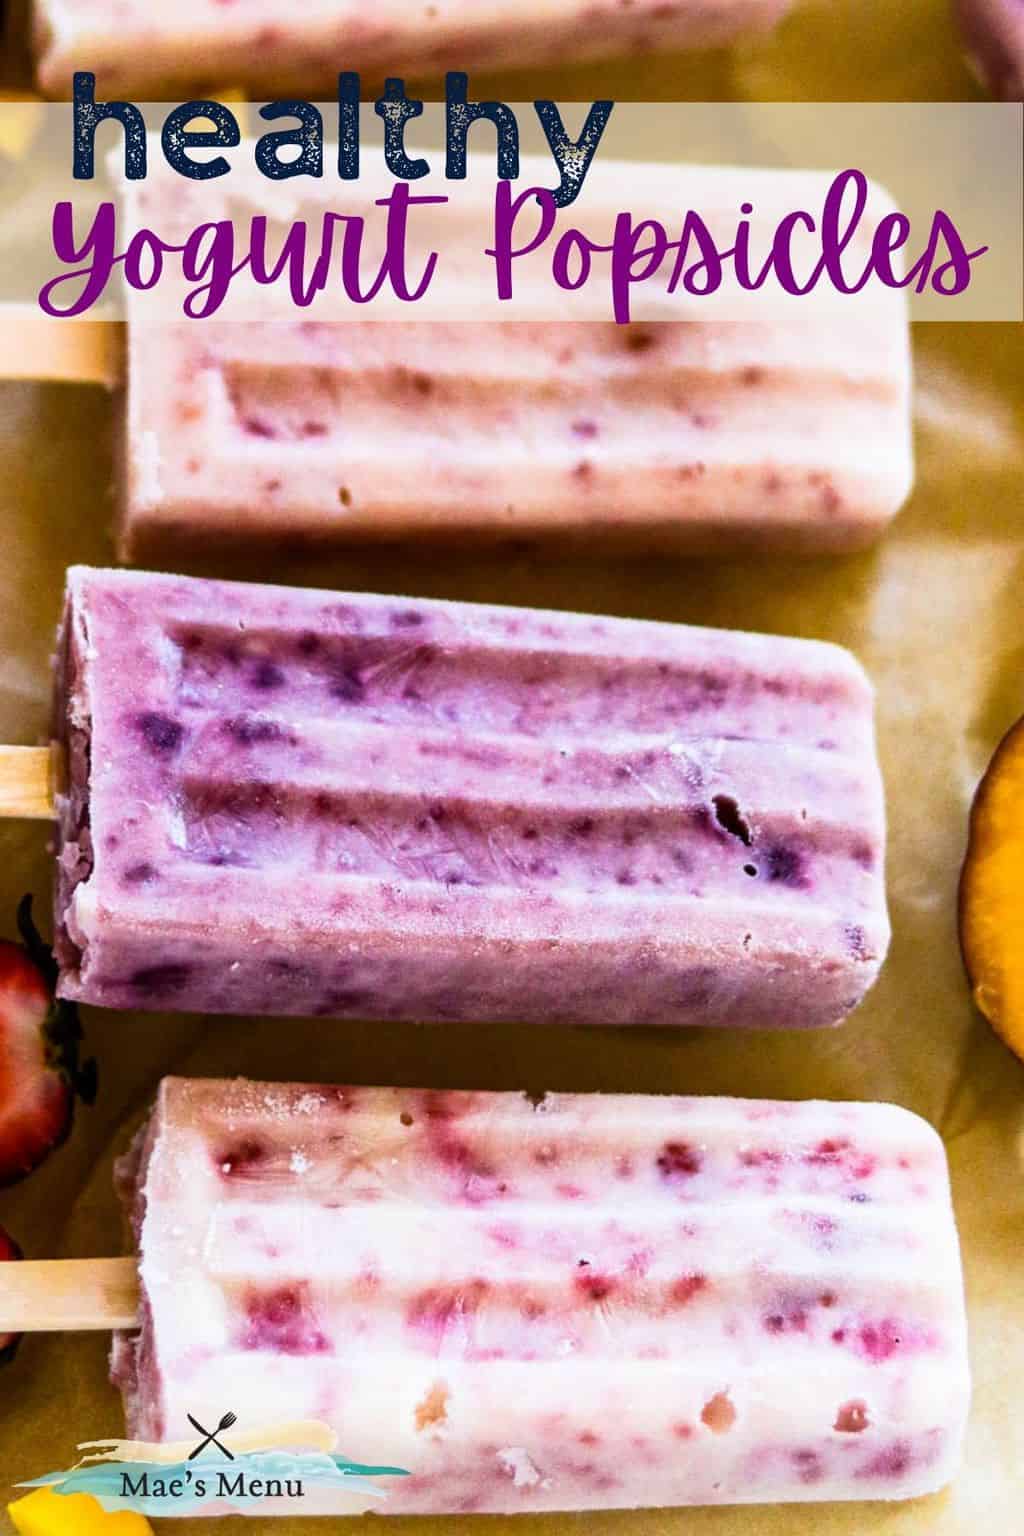 A pinterest pin for healthy yogurt popsicles with an up-close photo of the popsicles on a piece of parchment with fruit